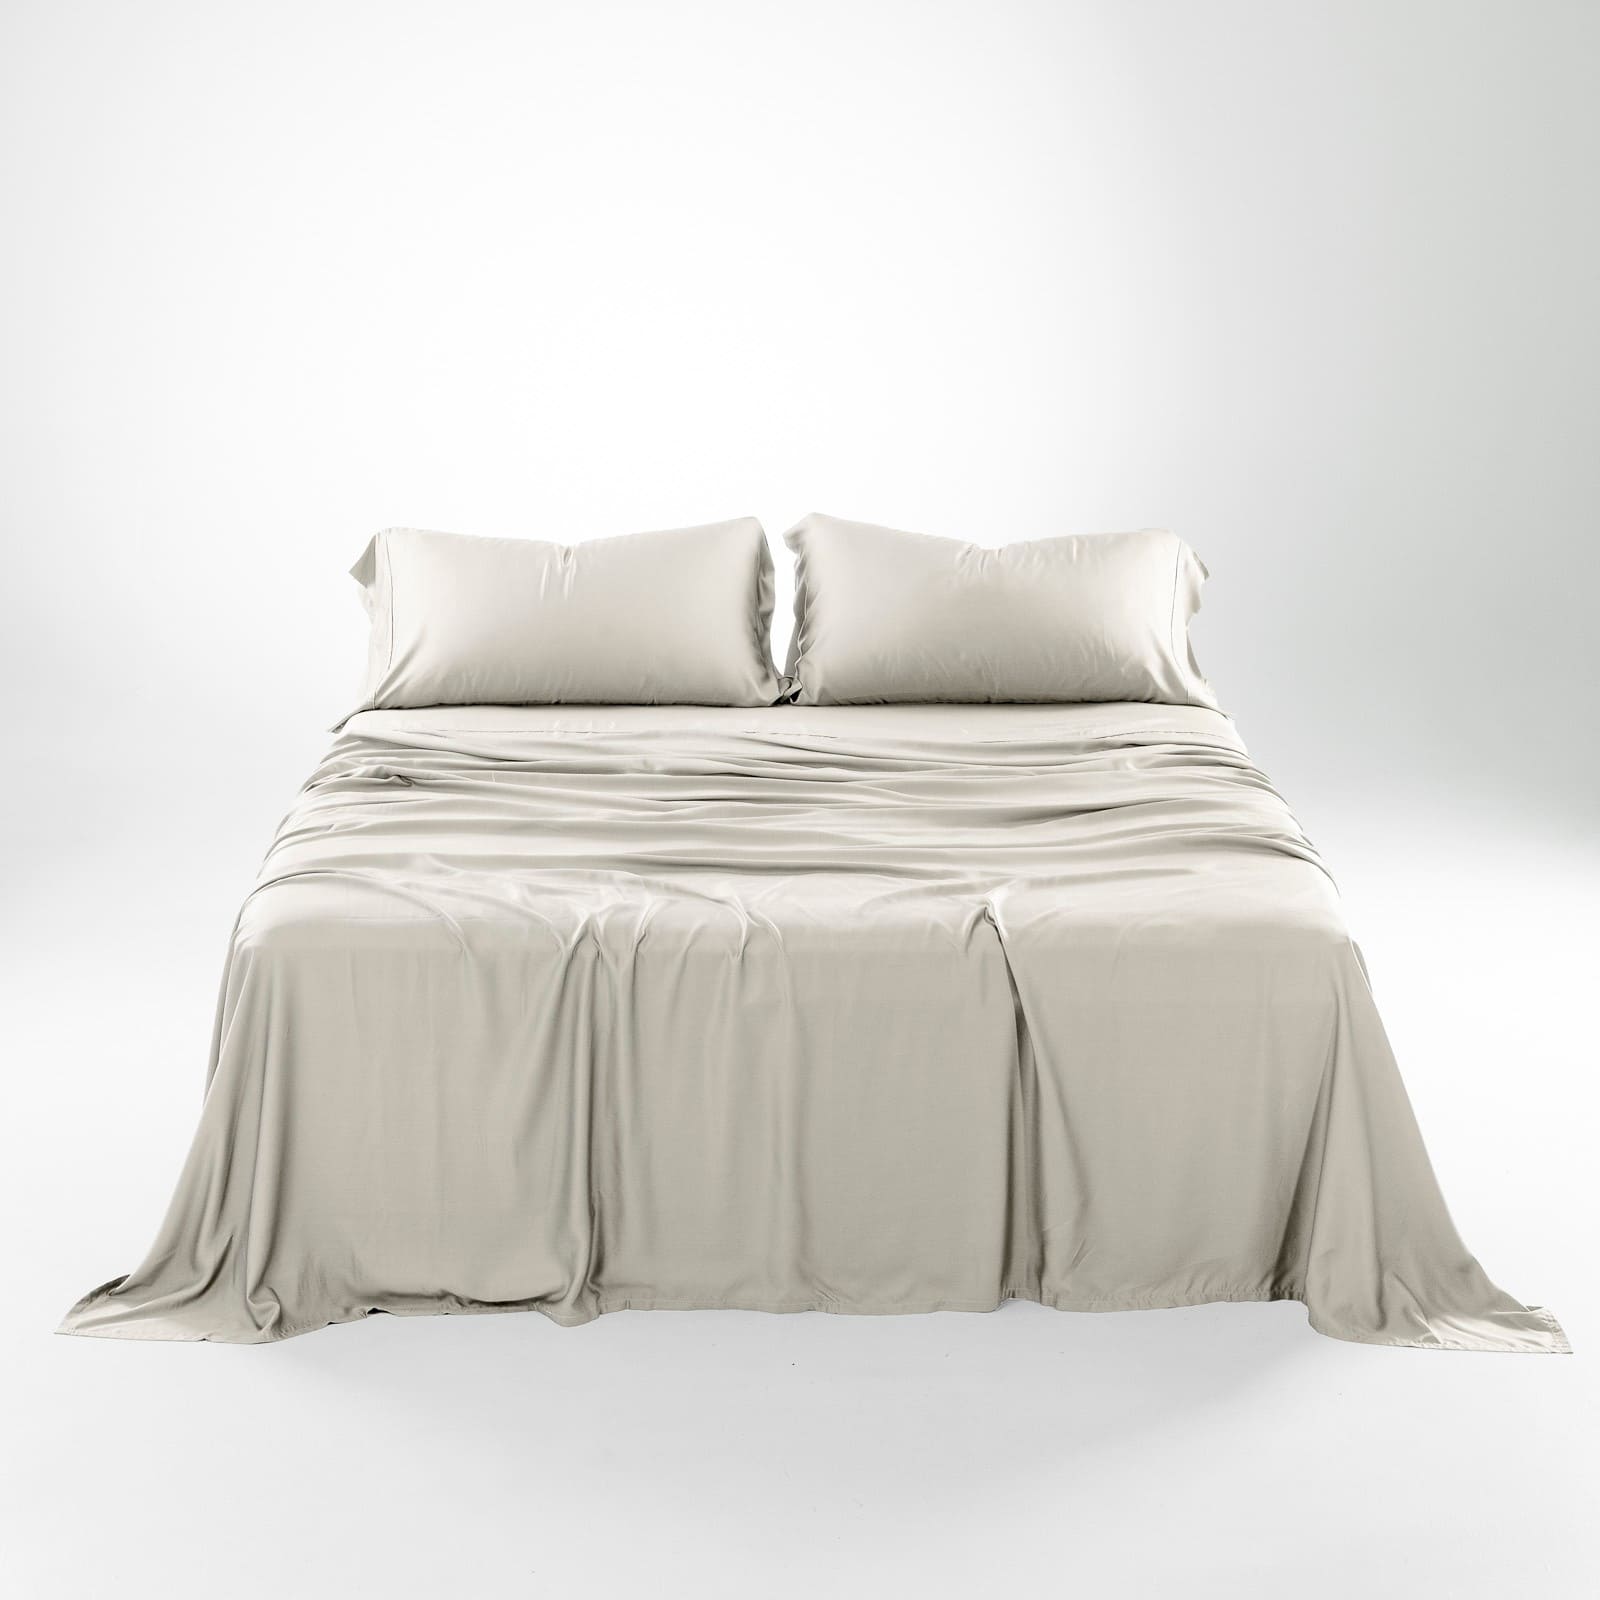 Olive + Crate Sheets - Eucalyptus Cooling Sheets for Hot Sleepers & Night Sweats, Full / Oatmeal